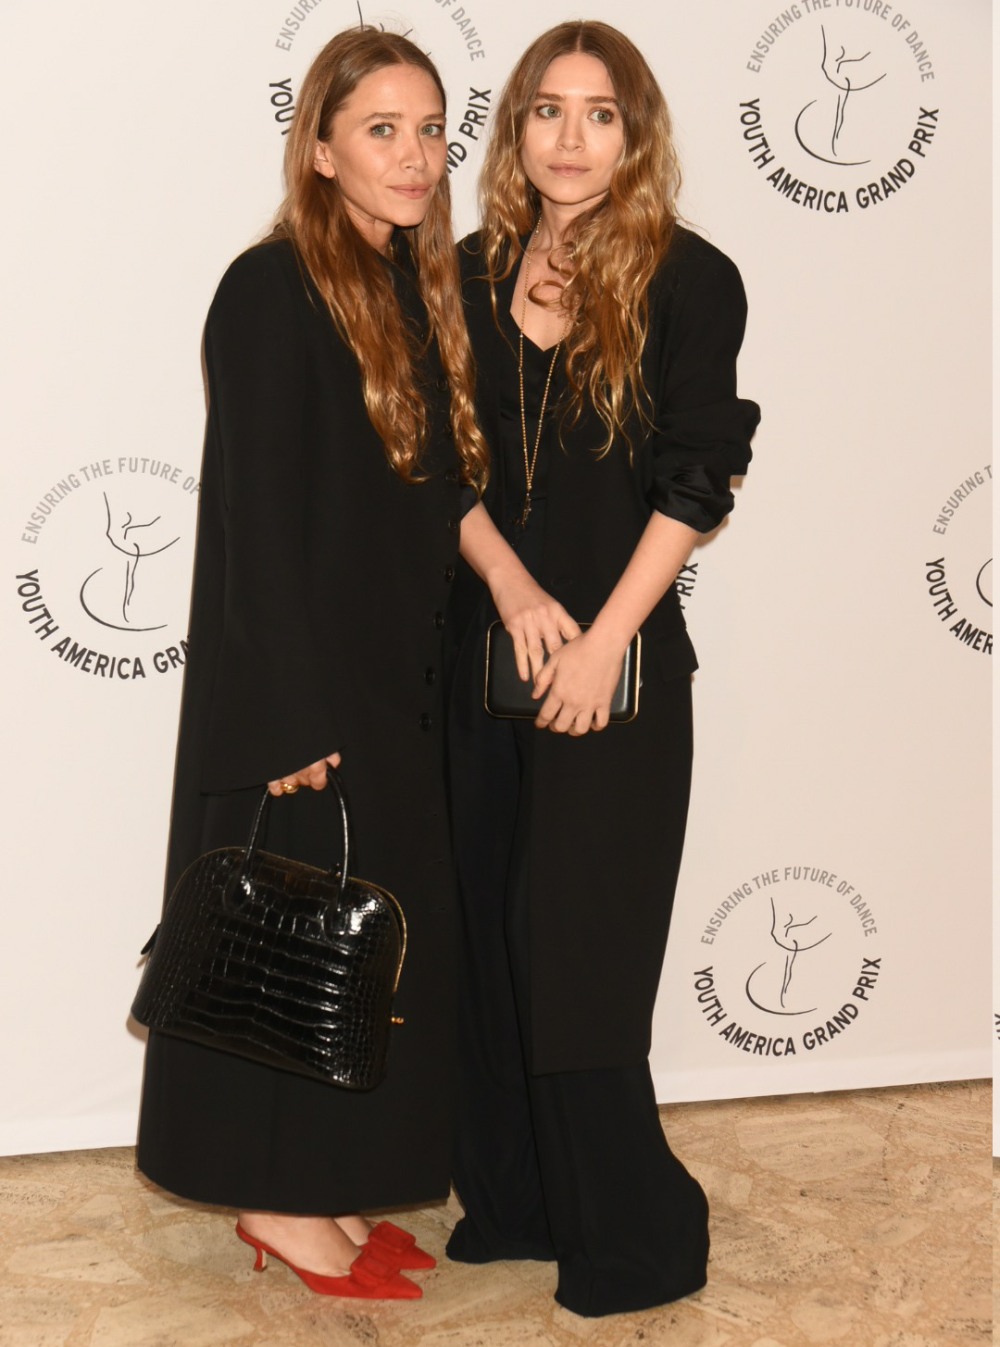 Mary Kate Olsen and Ashley Olsen attend the Youth America Grand Prix ballet competition